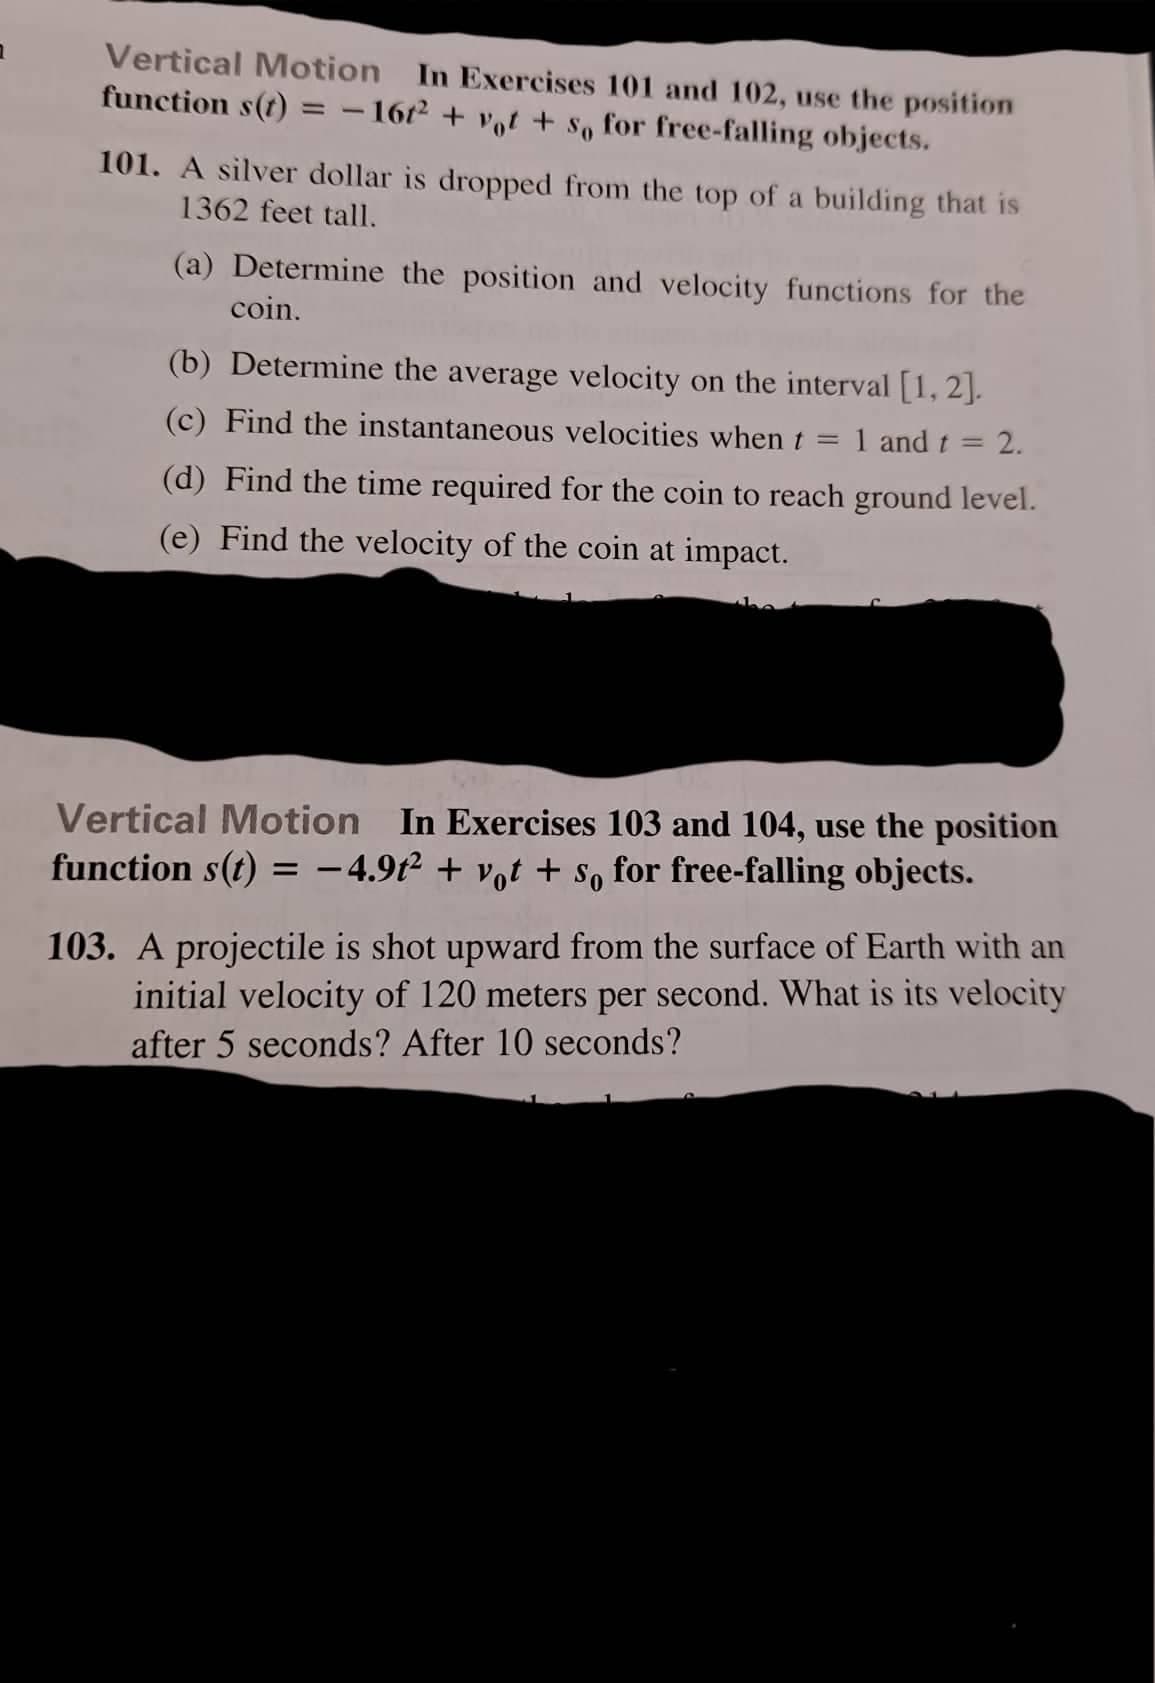 Vertical Motion In Exercises 101 and 102, use the position
function s(t) = - 1672 + vot + s, for free-falling objects.
%3D
101. A silver dollar is dropped from the top of a building that is
1362 feet tall.
(a) Determine the position and velocity functions for the
coin.
(b) Determine the average velocity on the interval [1, 2].
(c) Find the instantaneous velocities when t = 1 and t = 2.
%3D
(d) Find the time required for the coin to reach ground level.
(e) Find the velocity of the coin at impact.
Vertical Motion In Exercises 103 and 104, use the position
function s(t) = -4.9t² + vot + so for free-falling objects.
103. A projectile is shot upward from the surface of Earth with an
initial velocity of 120 meters per second. What is its velocity
after 5 seconds? After 10 seconds?
